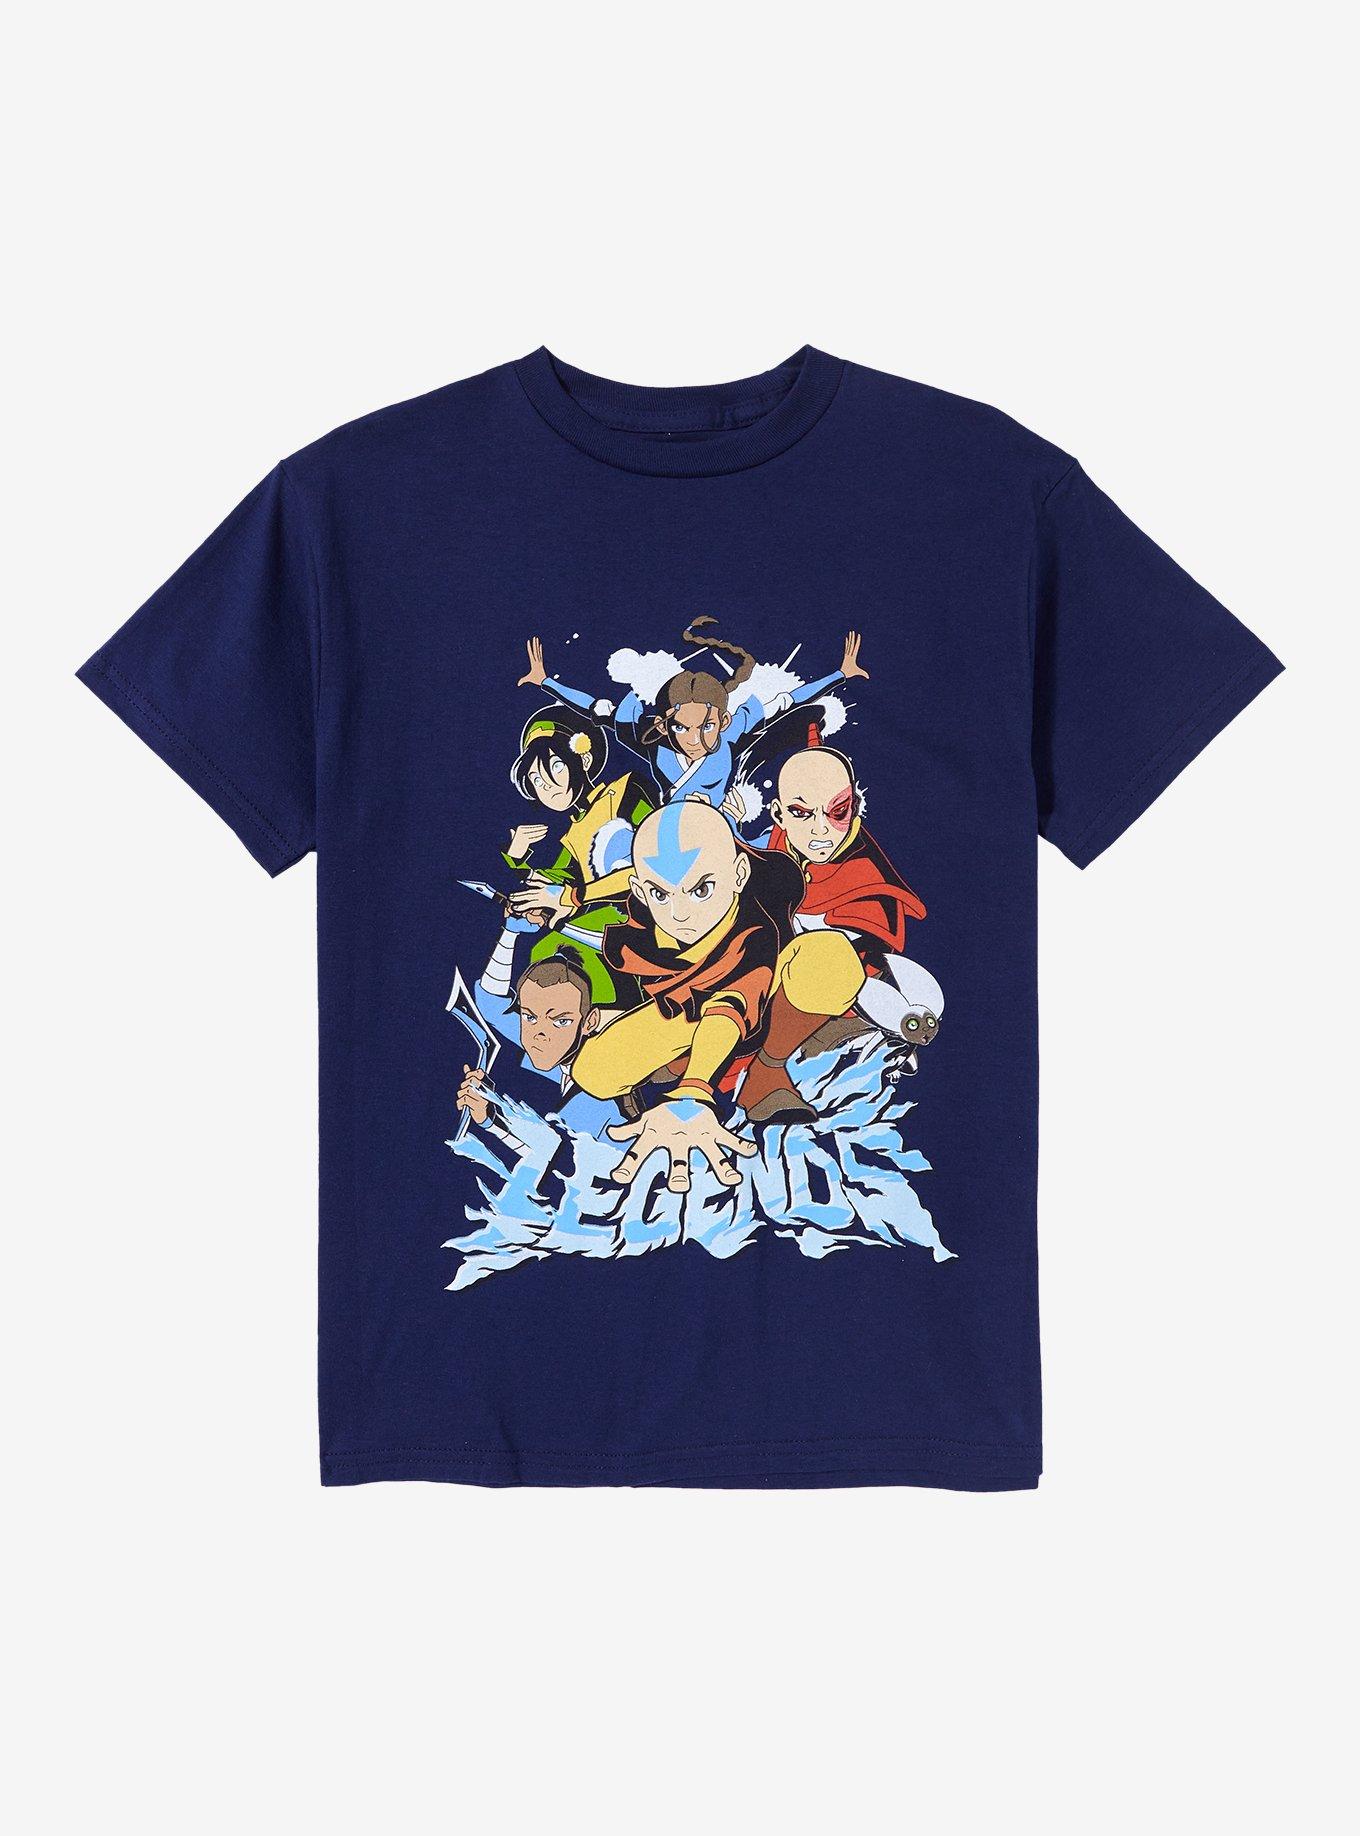 Avatar: The Last Airbender Group Portrait Youth T-Shirt, NAVY, hi-res